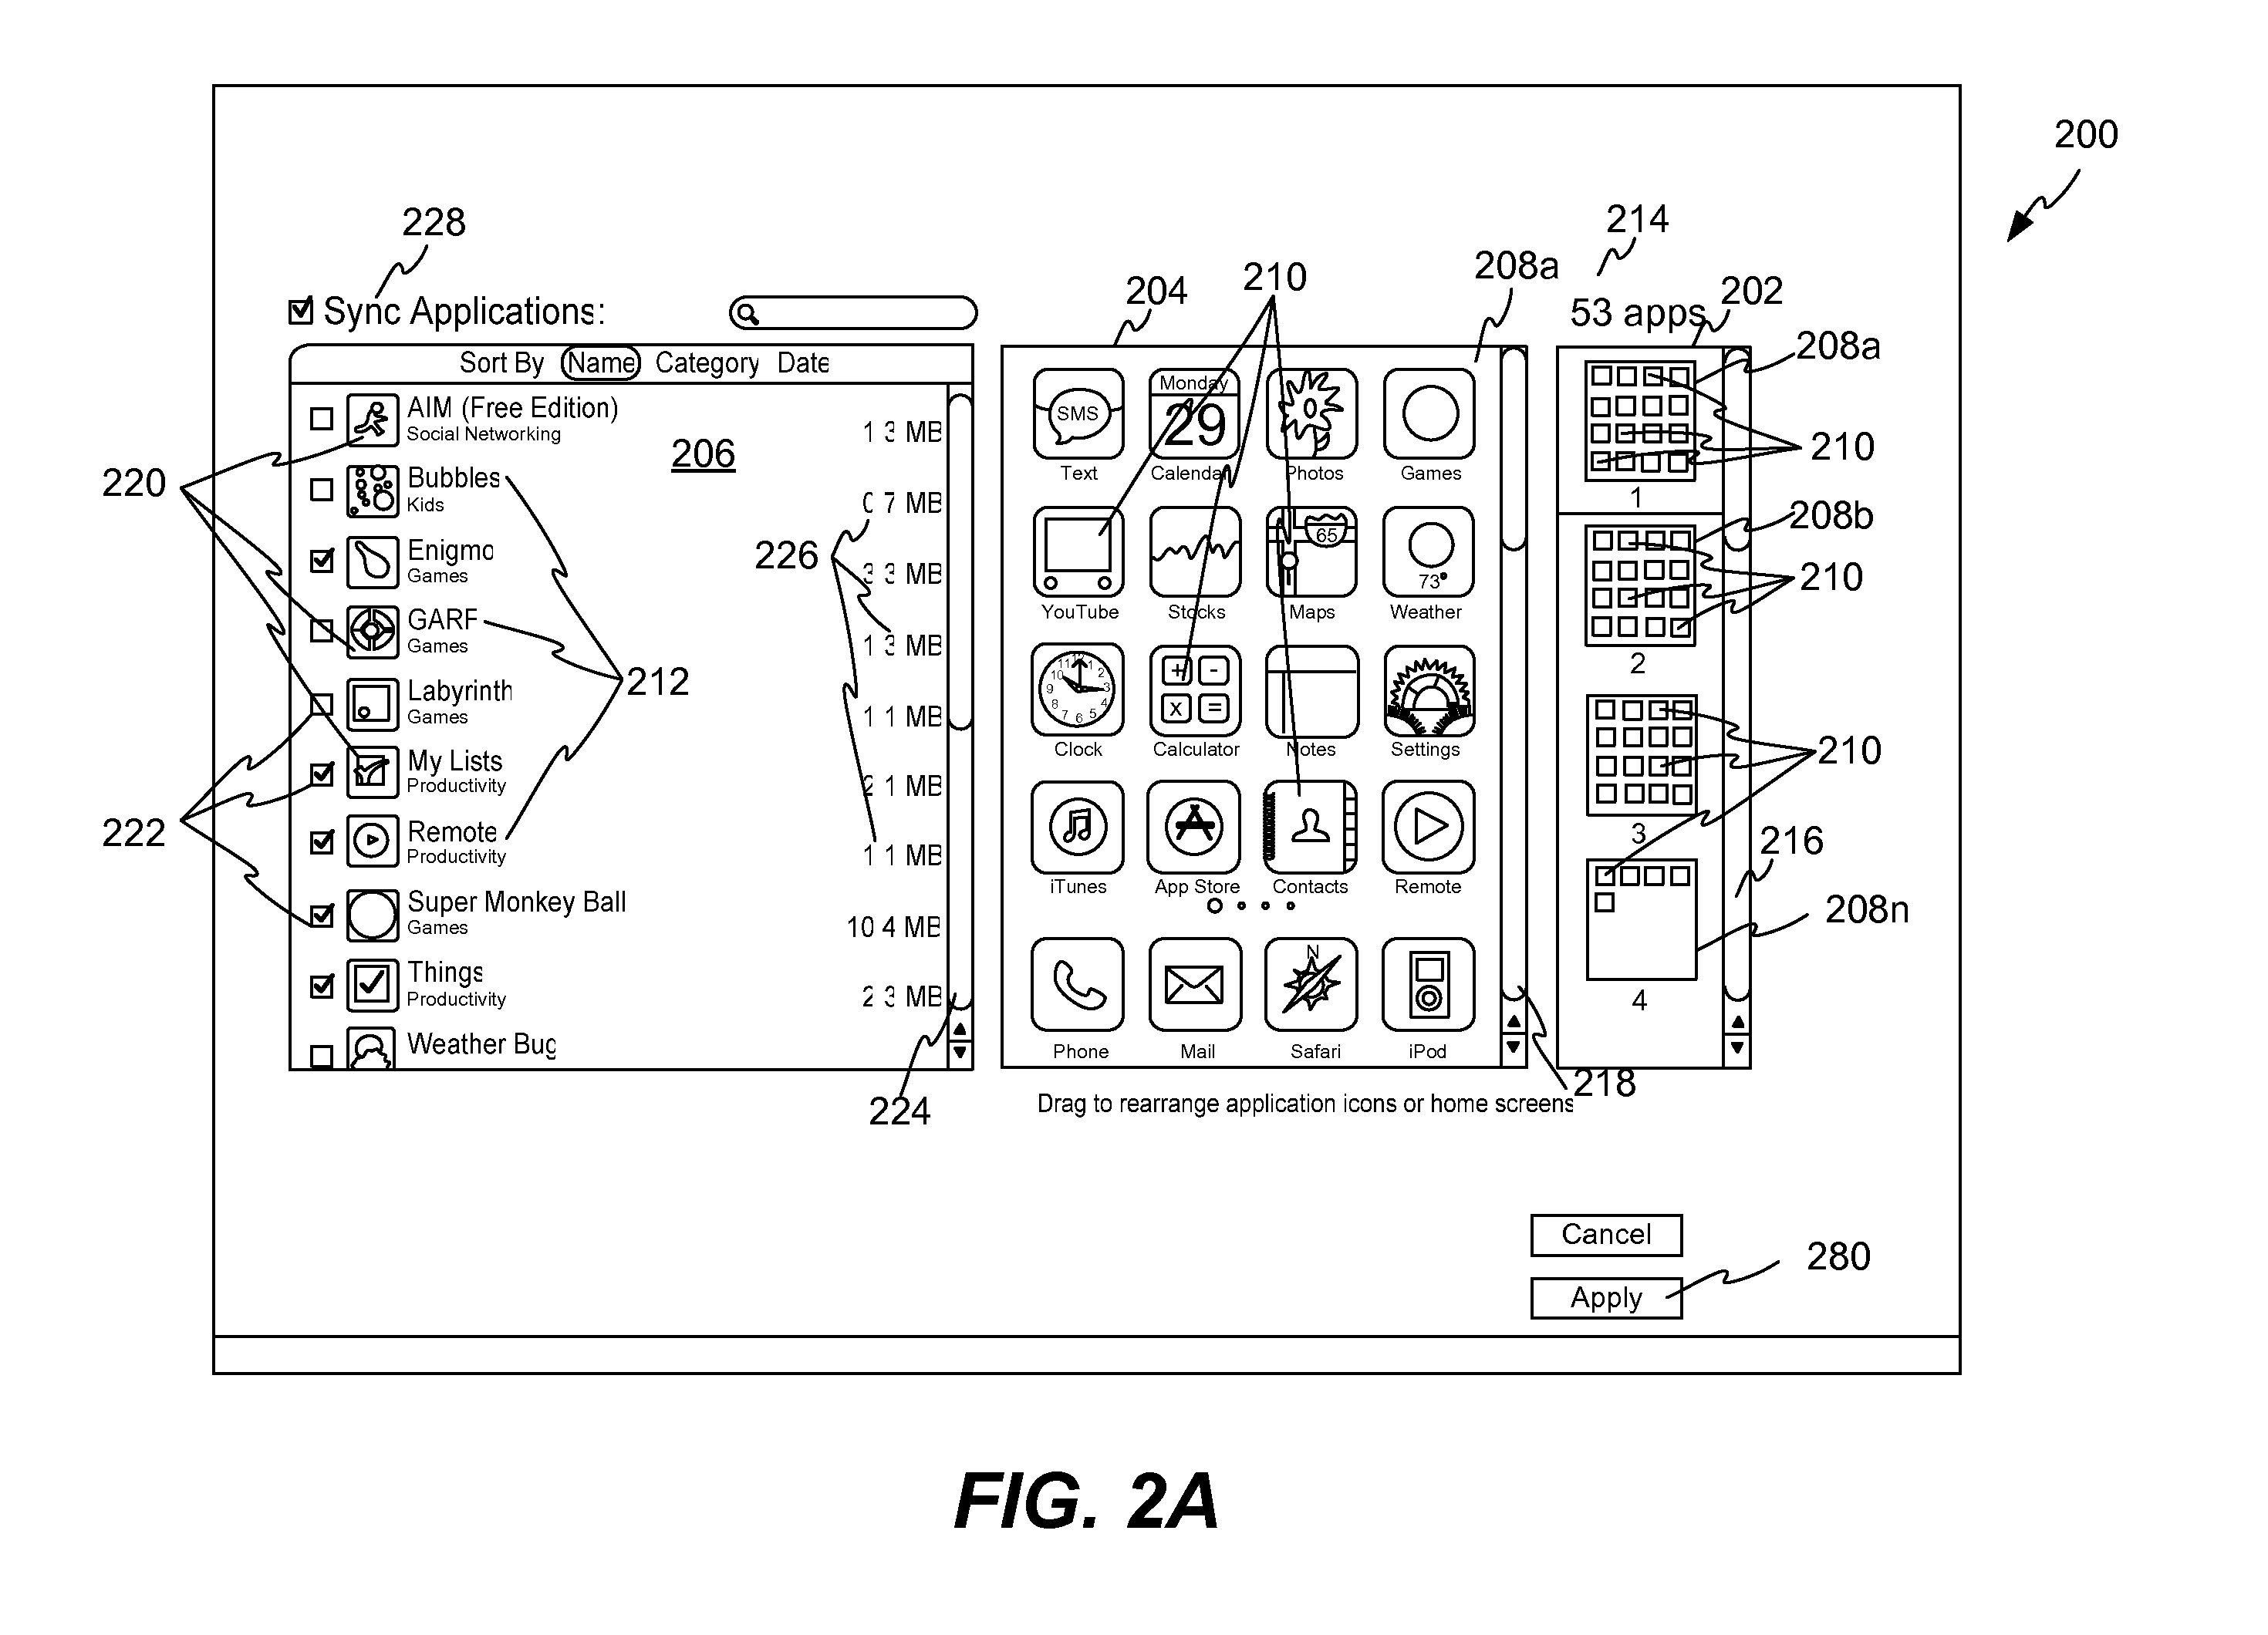 Management of Application Programs on a Portable Electronic Device